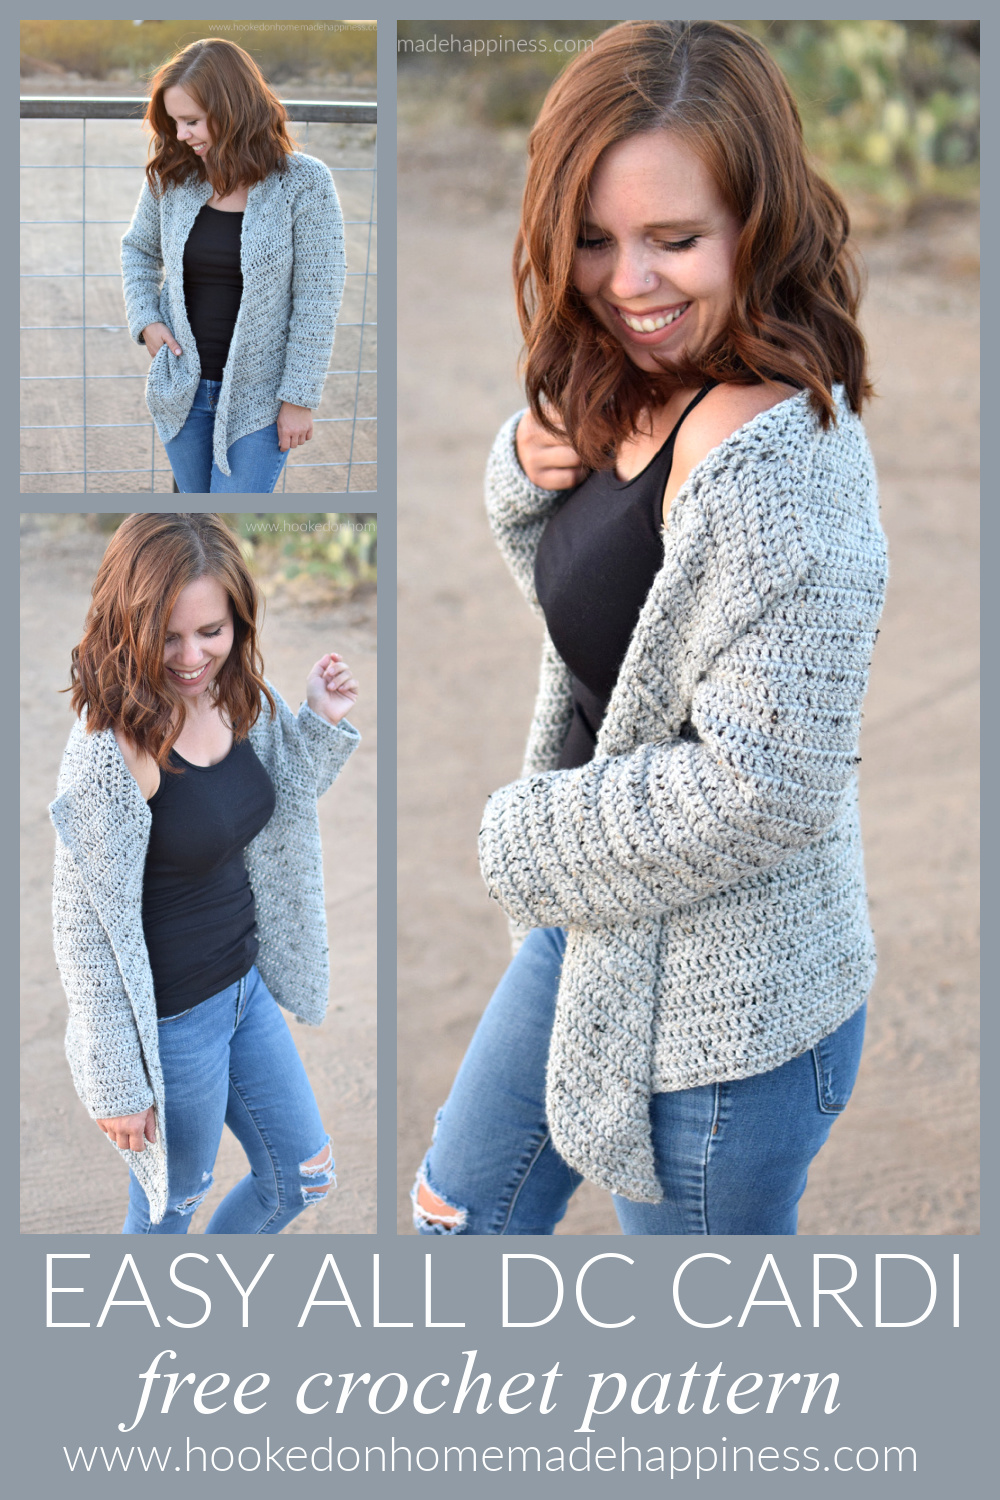 Easy All DC Cardi Crochet Pattern - Hooked on Homemade Happiness